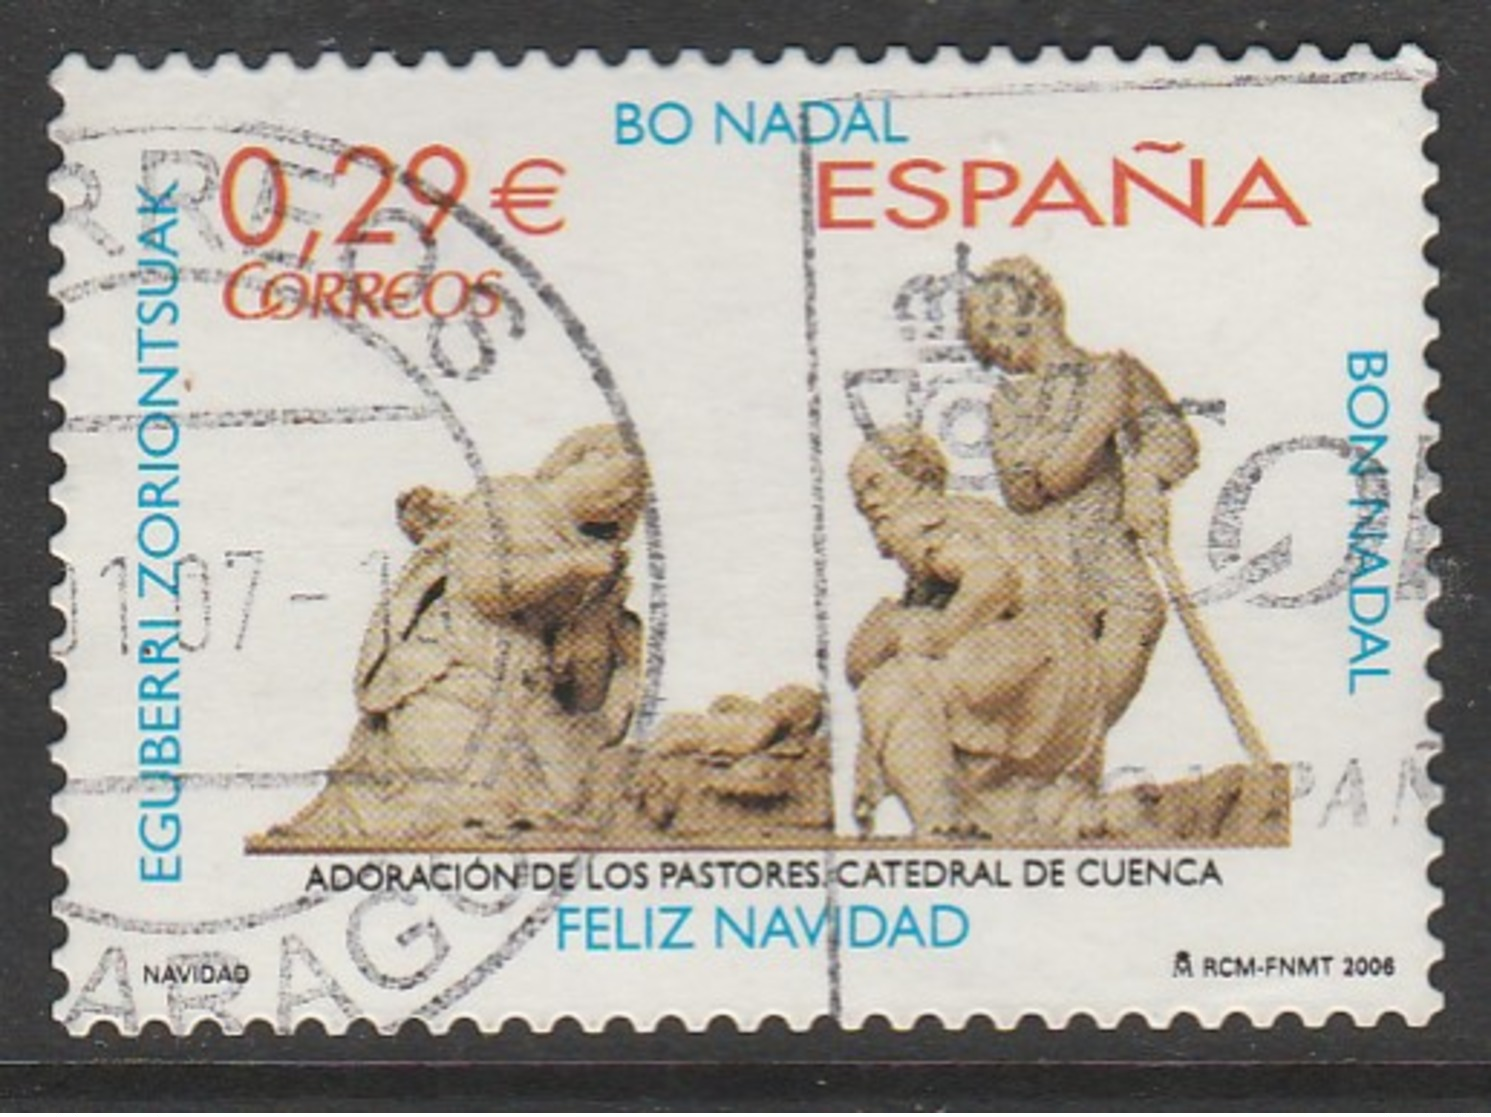 Spain 2006 Christmas 0.29 € Multicoloured  SW 4181 O Used - Used Stamps